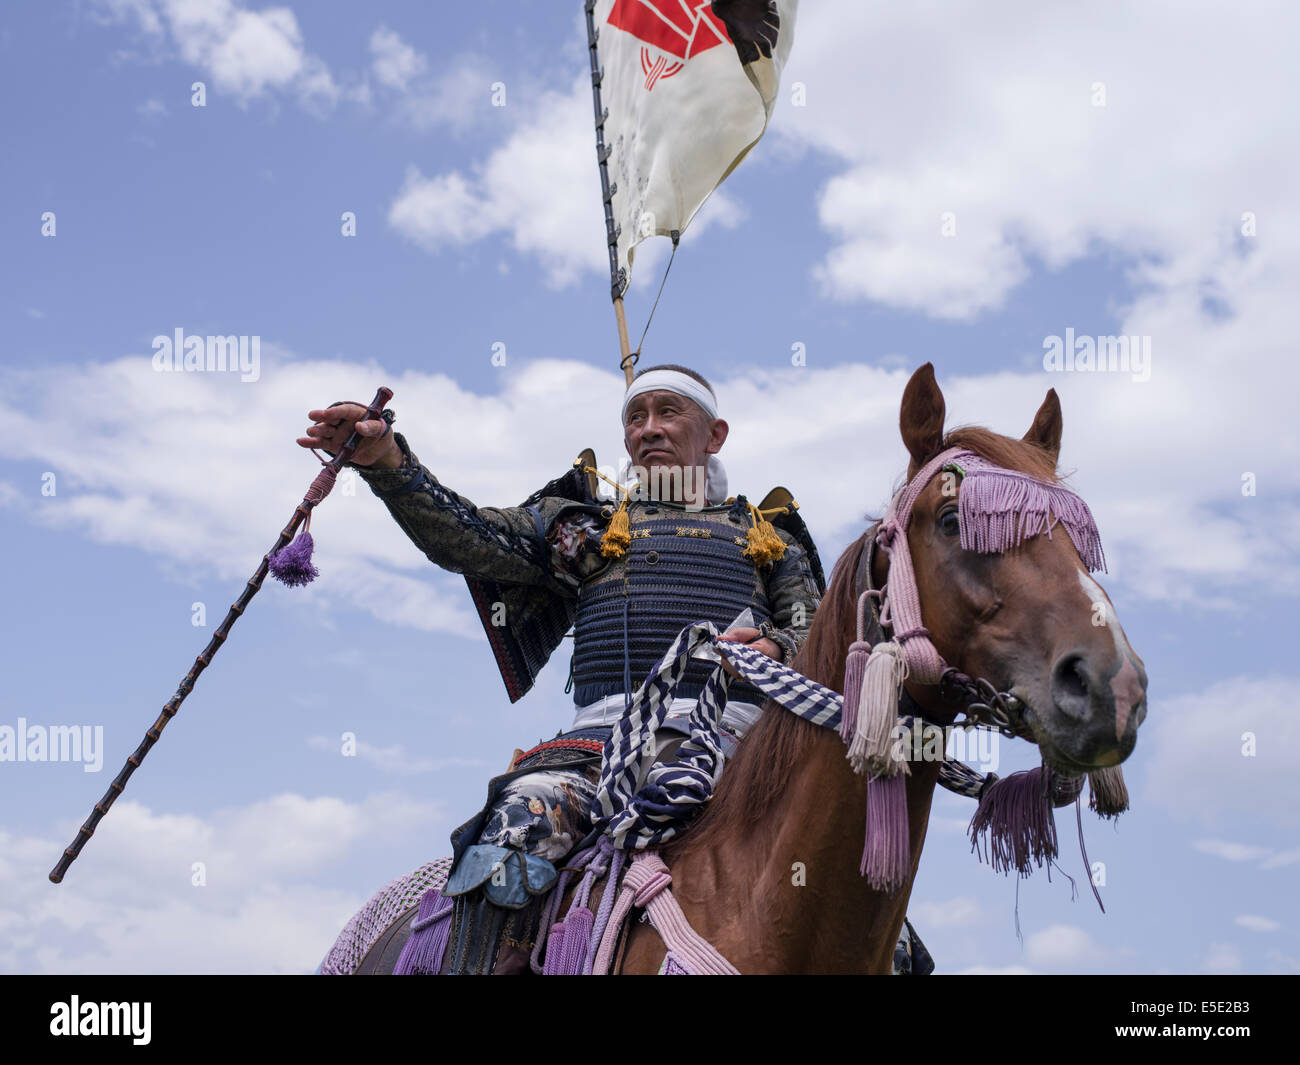 Soma Nomaoi A Traditional Japanese Samurai Horseman Festival Held In Minami Soma Fukushima Prefecture Japan The Area Is Still Recovering From The 11 Tohoku Earthquake And Tsunami Credit Chris Willson Alamy Live News